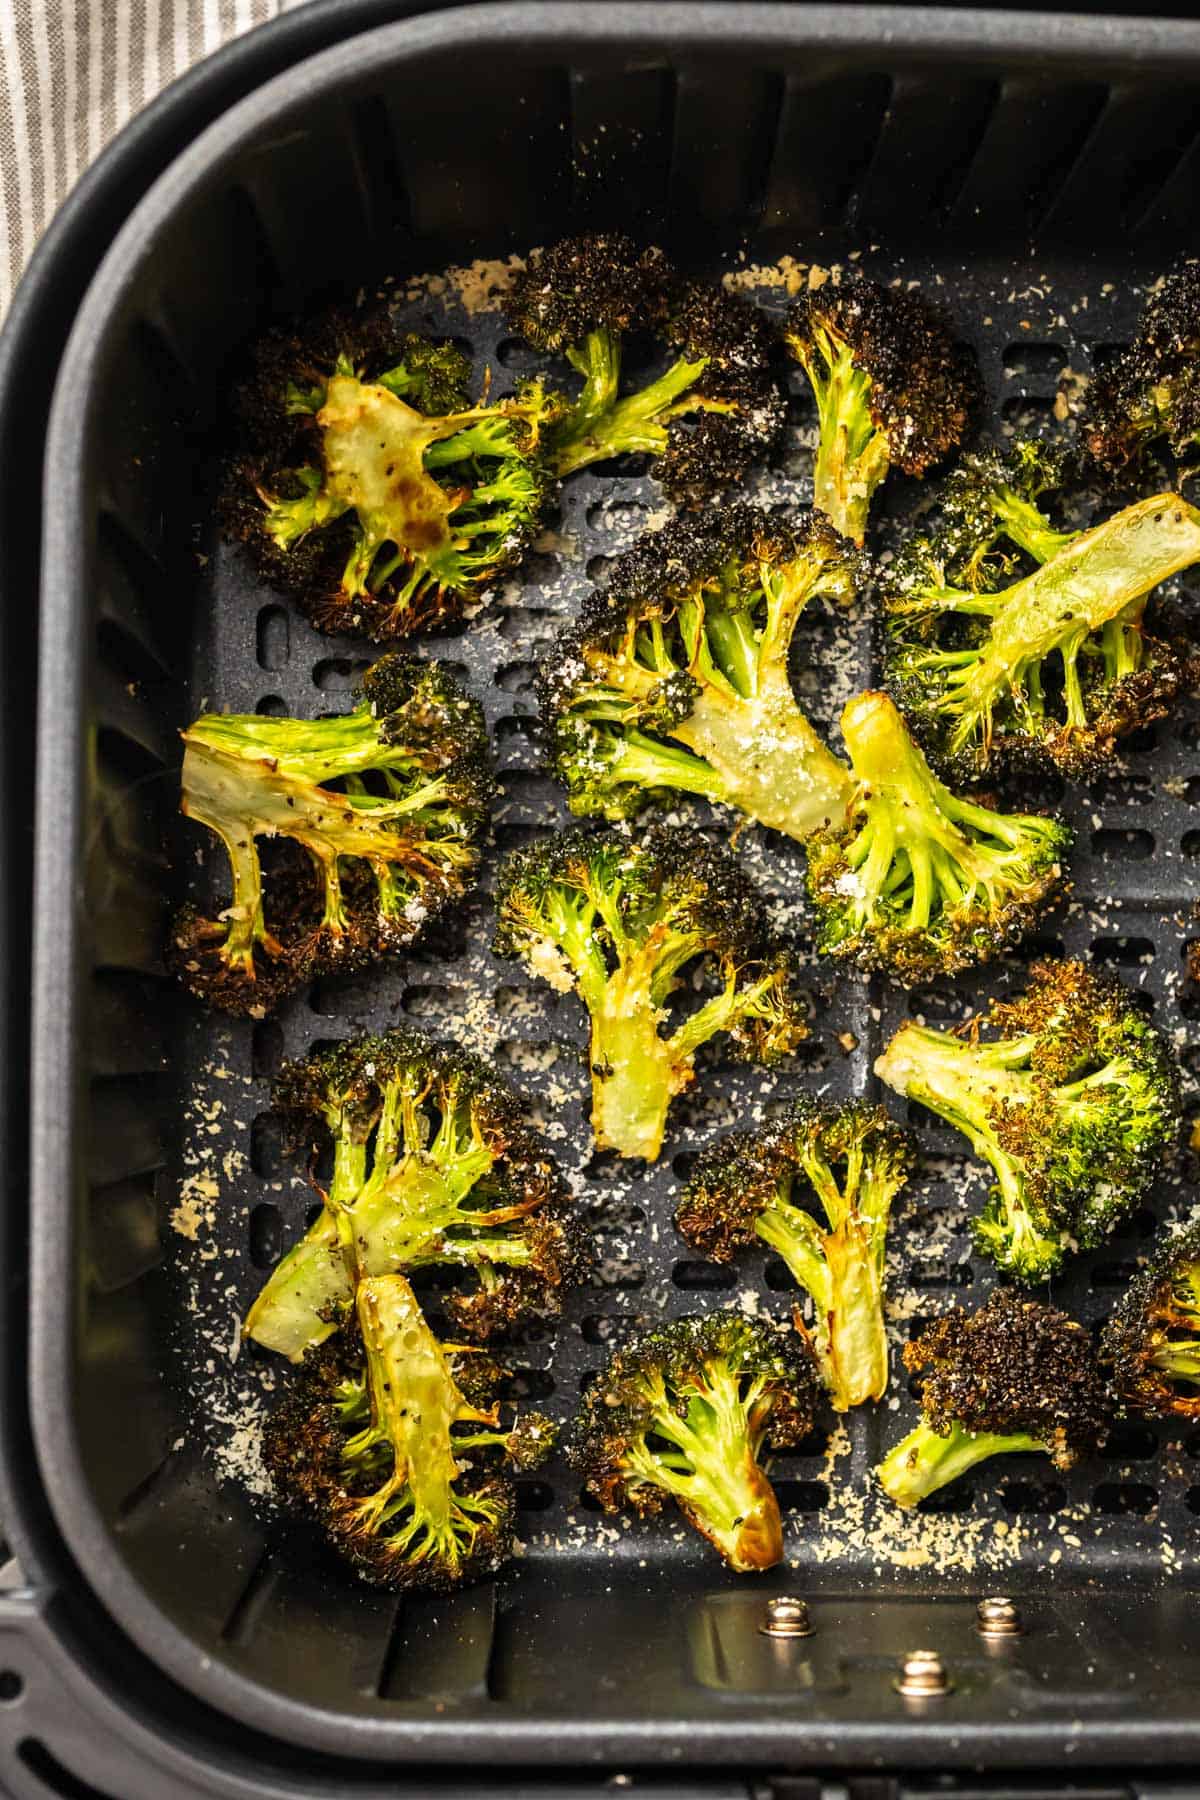 crispy broccoli florets in the air fryer basket and a striped cloth to the side